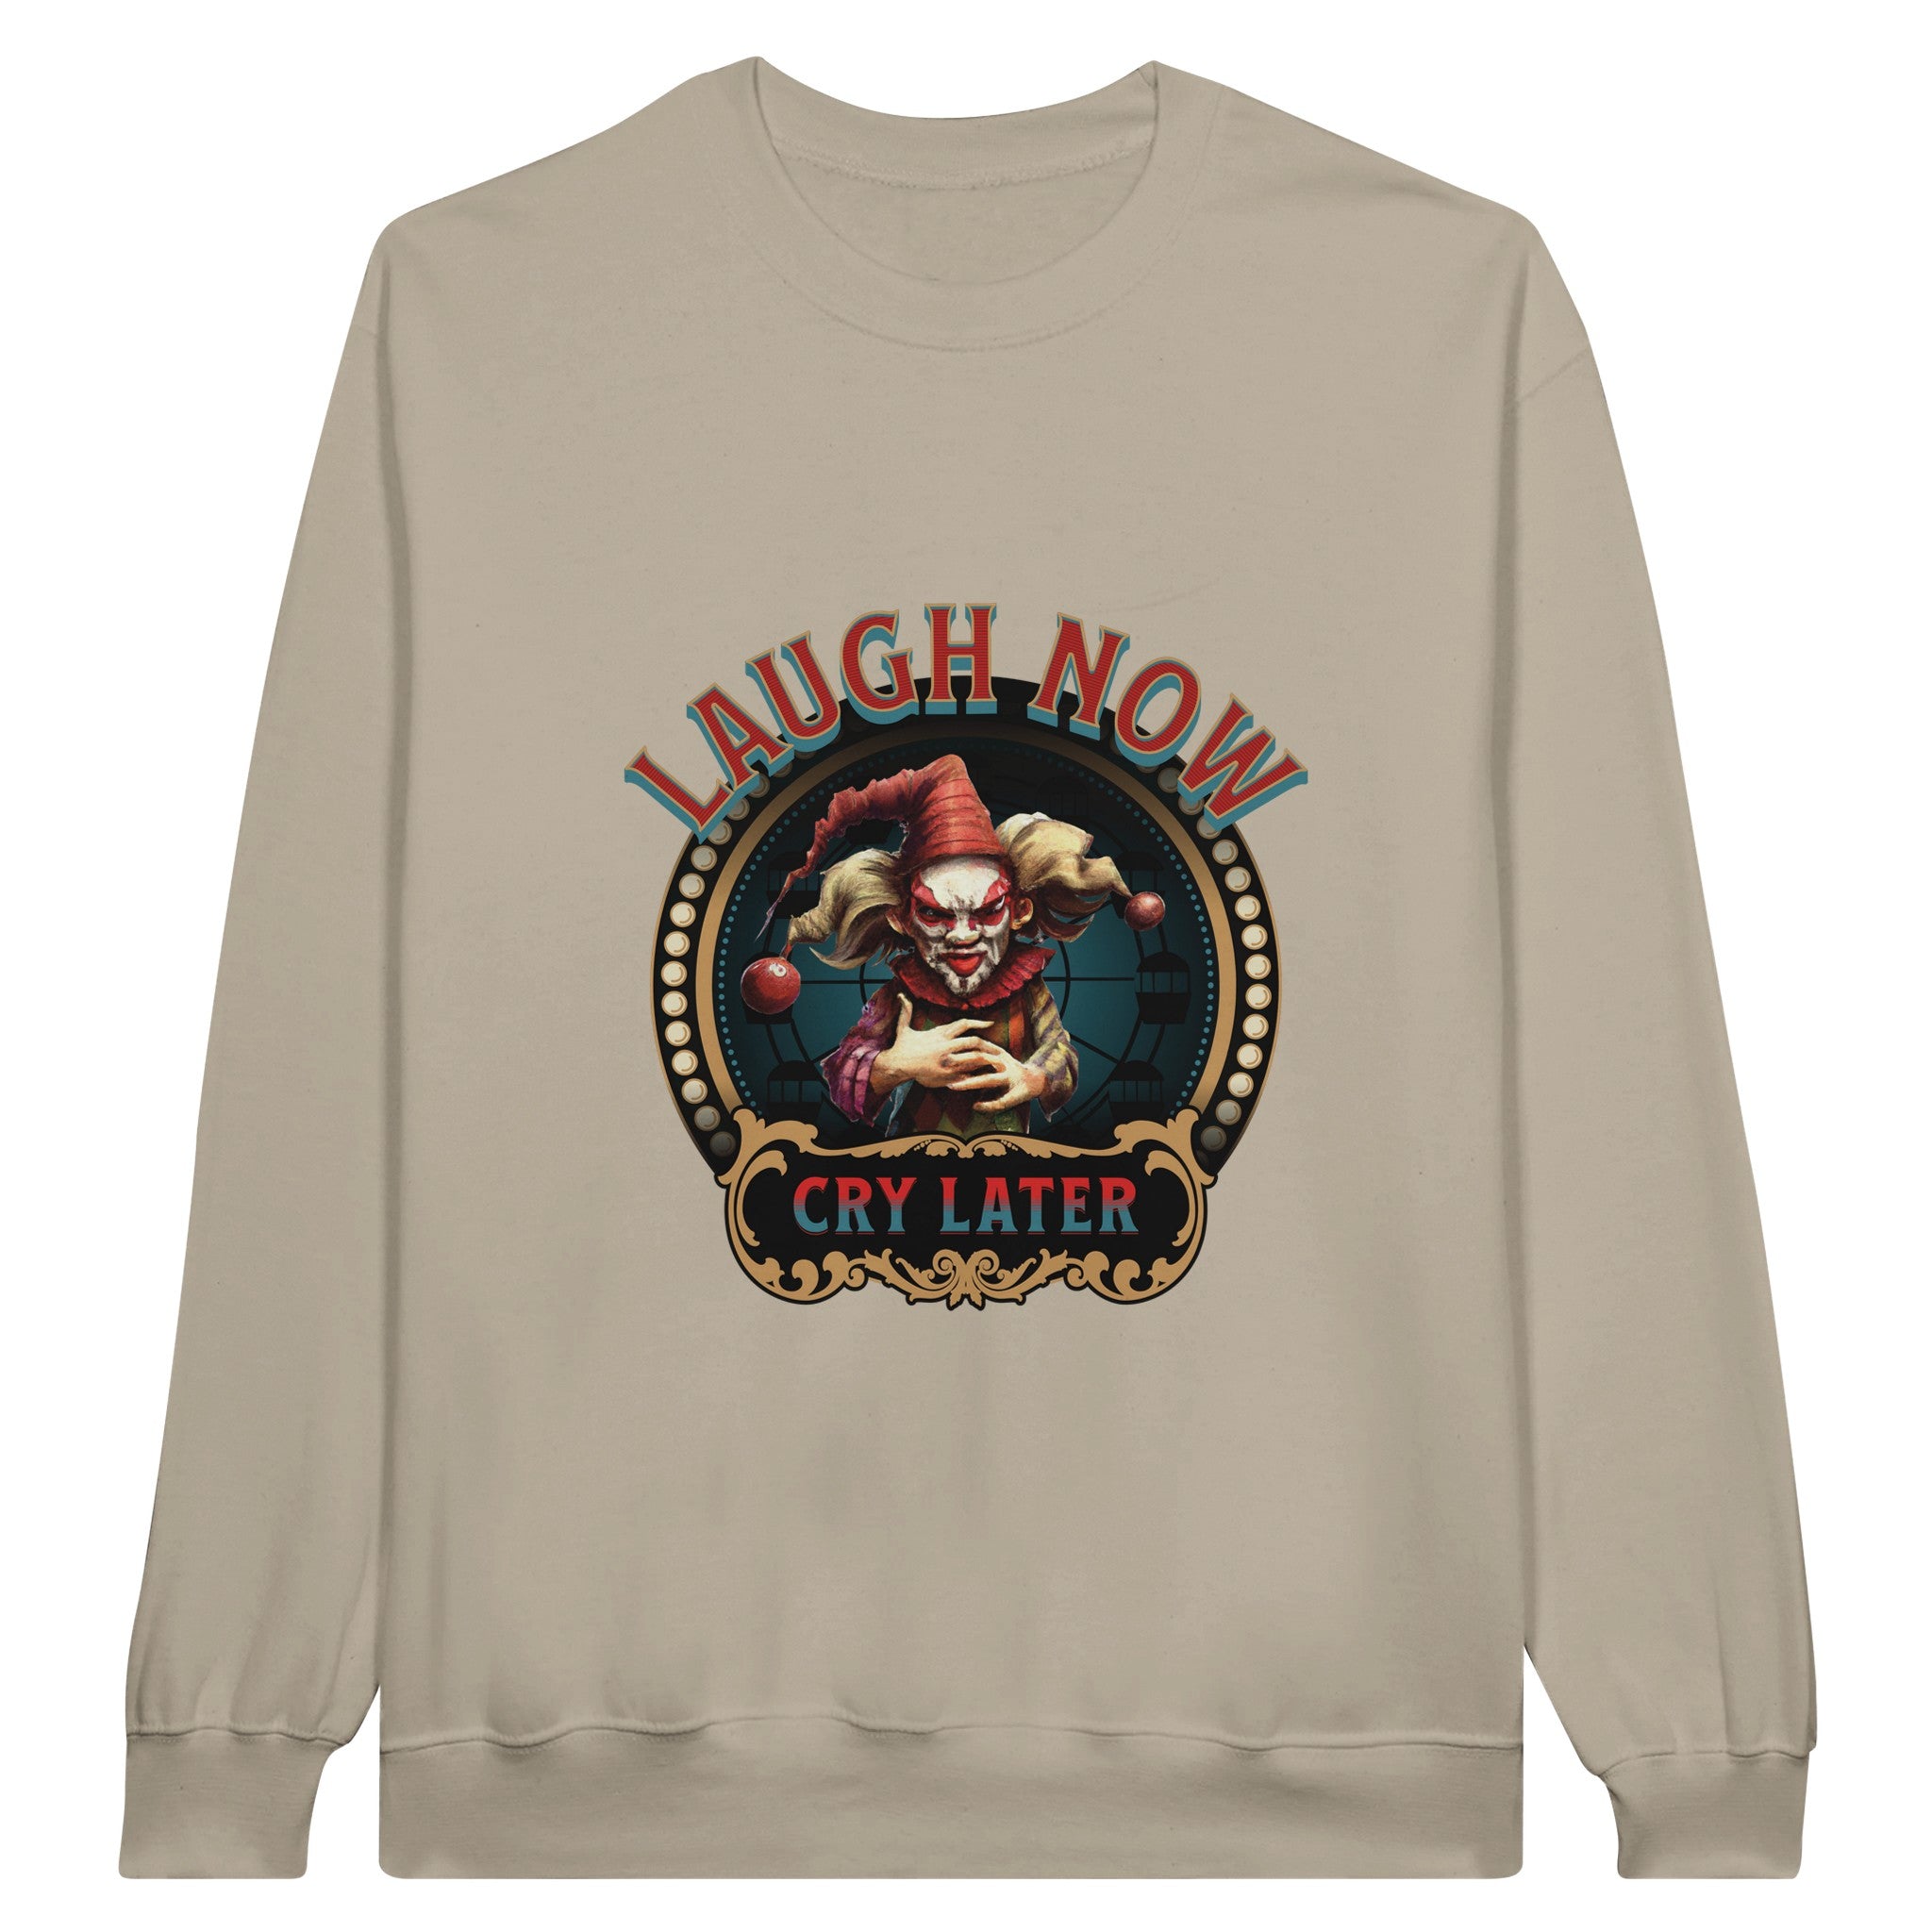 SORTYGO - Laugh Now Cry Later Men Sweatshirt in Sand